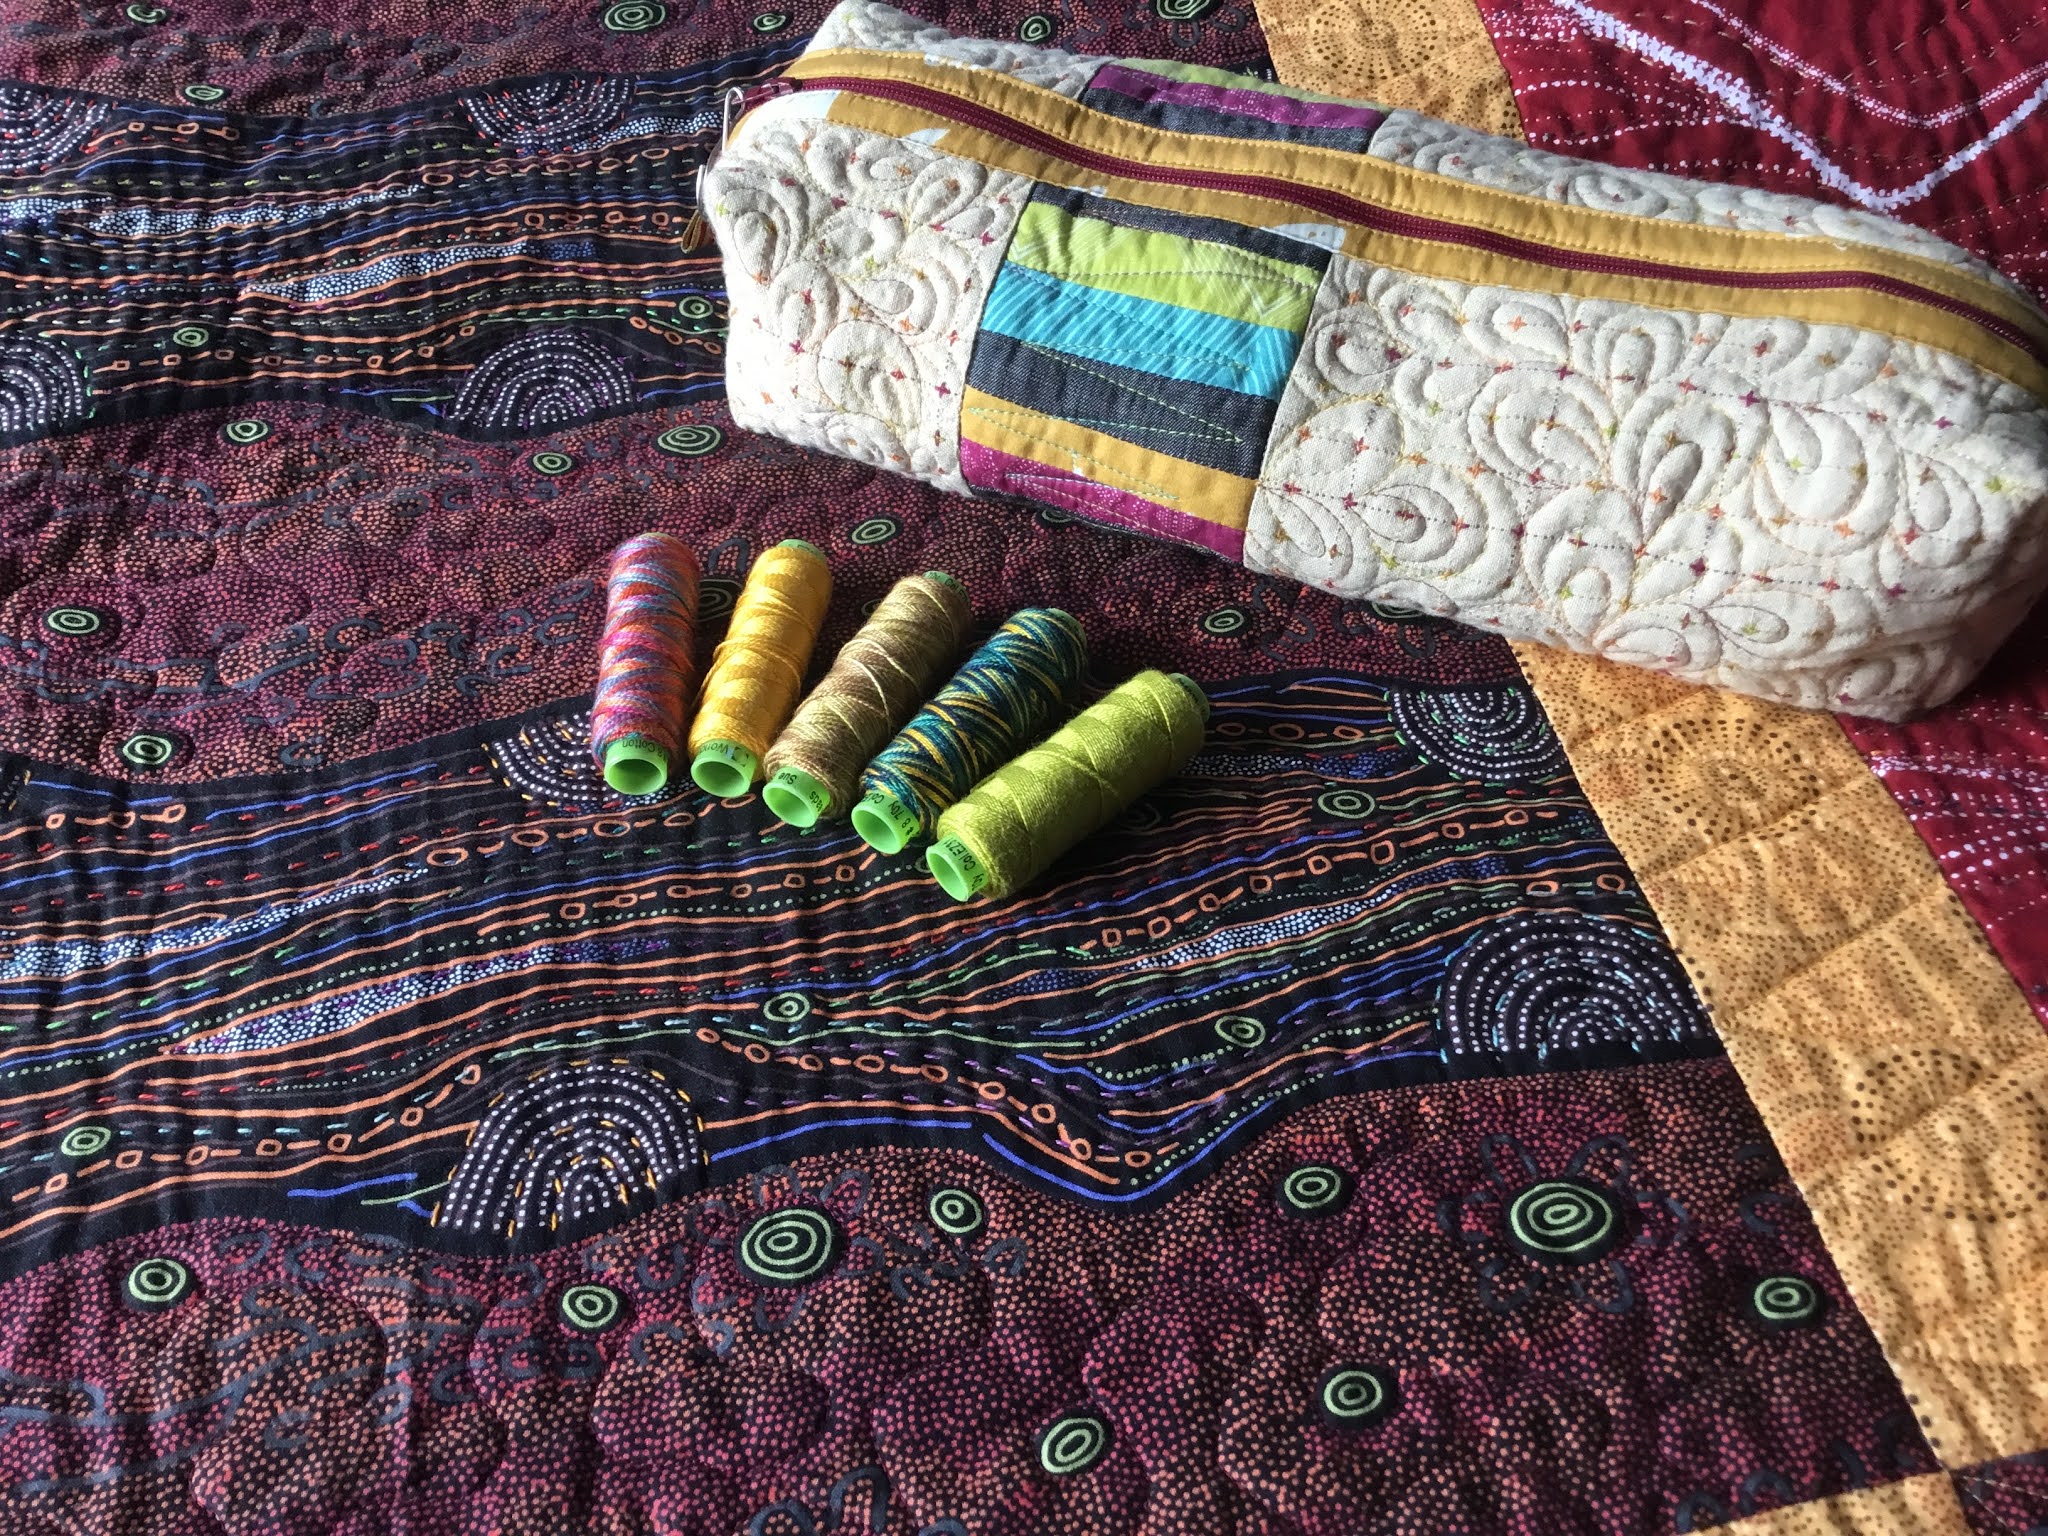 An introduction to slow stitch and mindfulness with Helen Birmingham -  Ripon Museums